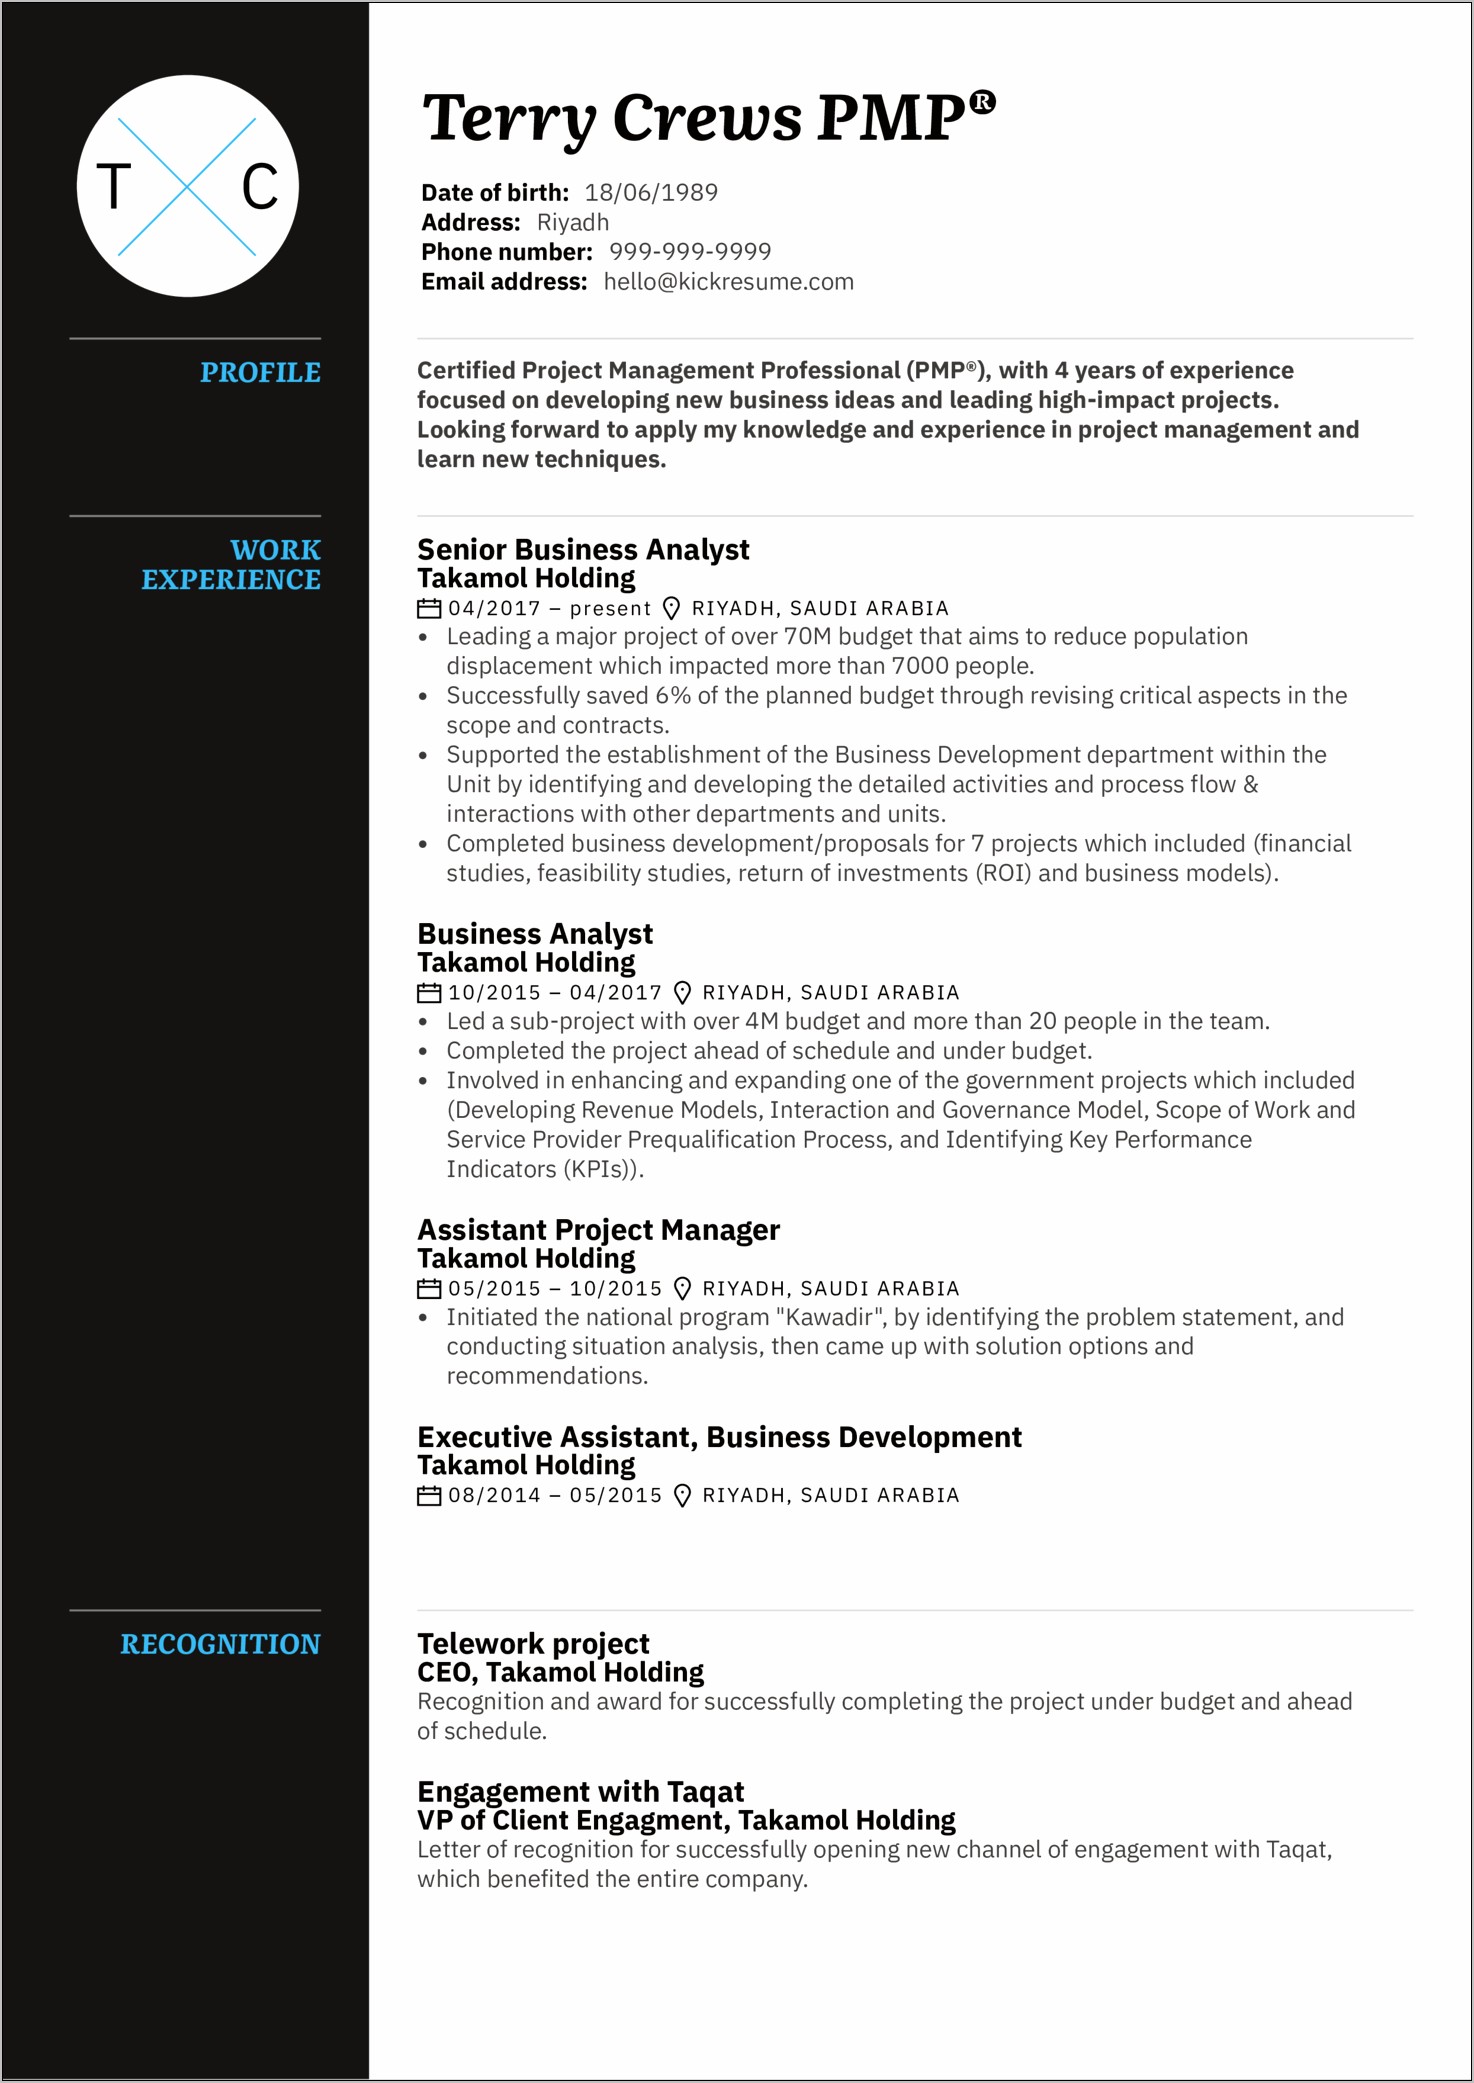 Project Manager Roles And Responsibilities In Resume